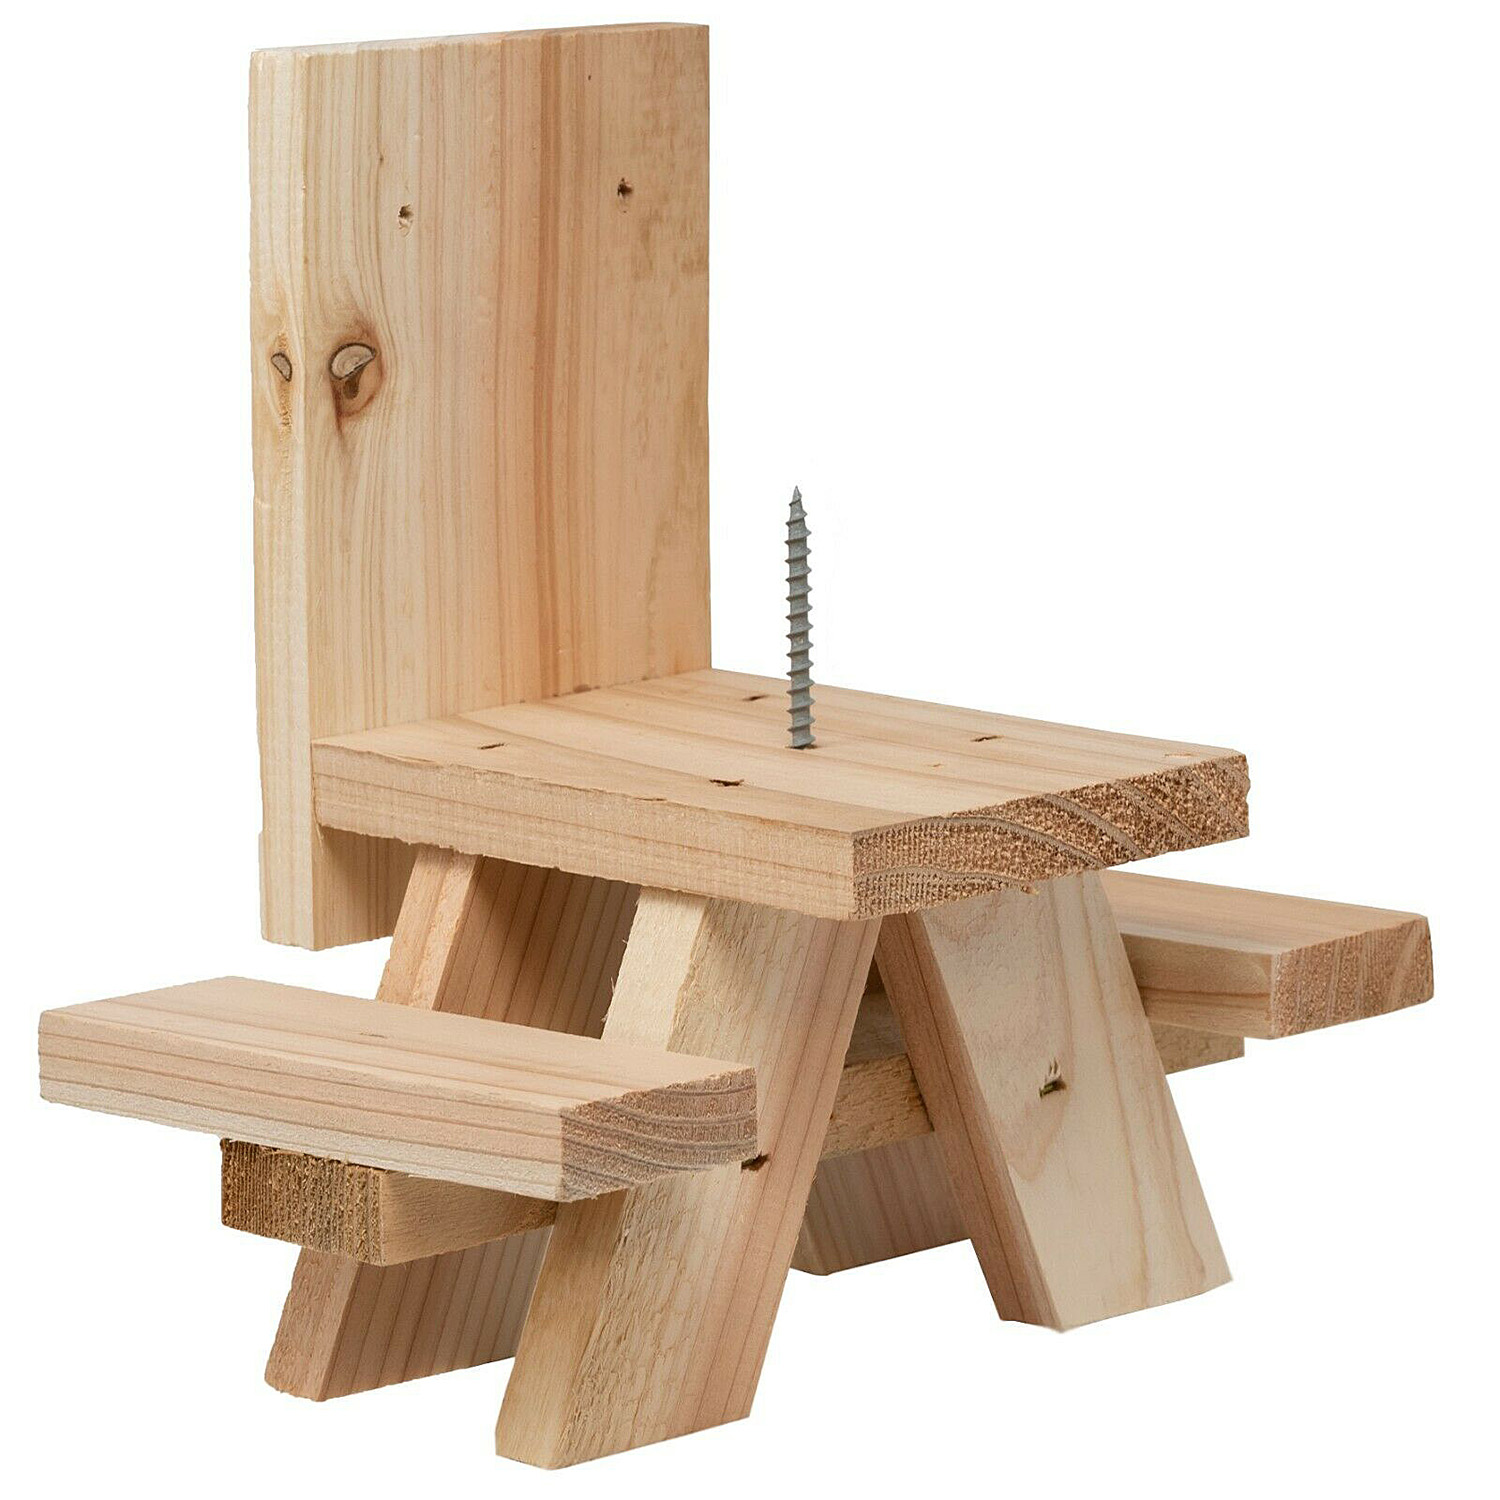 Build a Squirrel Picnic Table Kit with Corn Holder - Chirp 